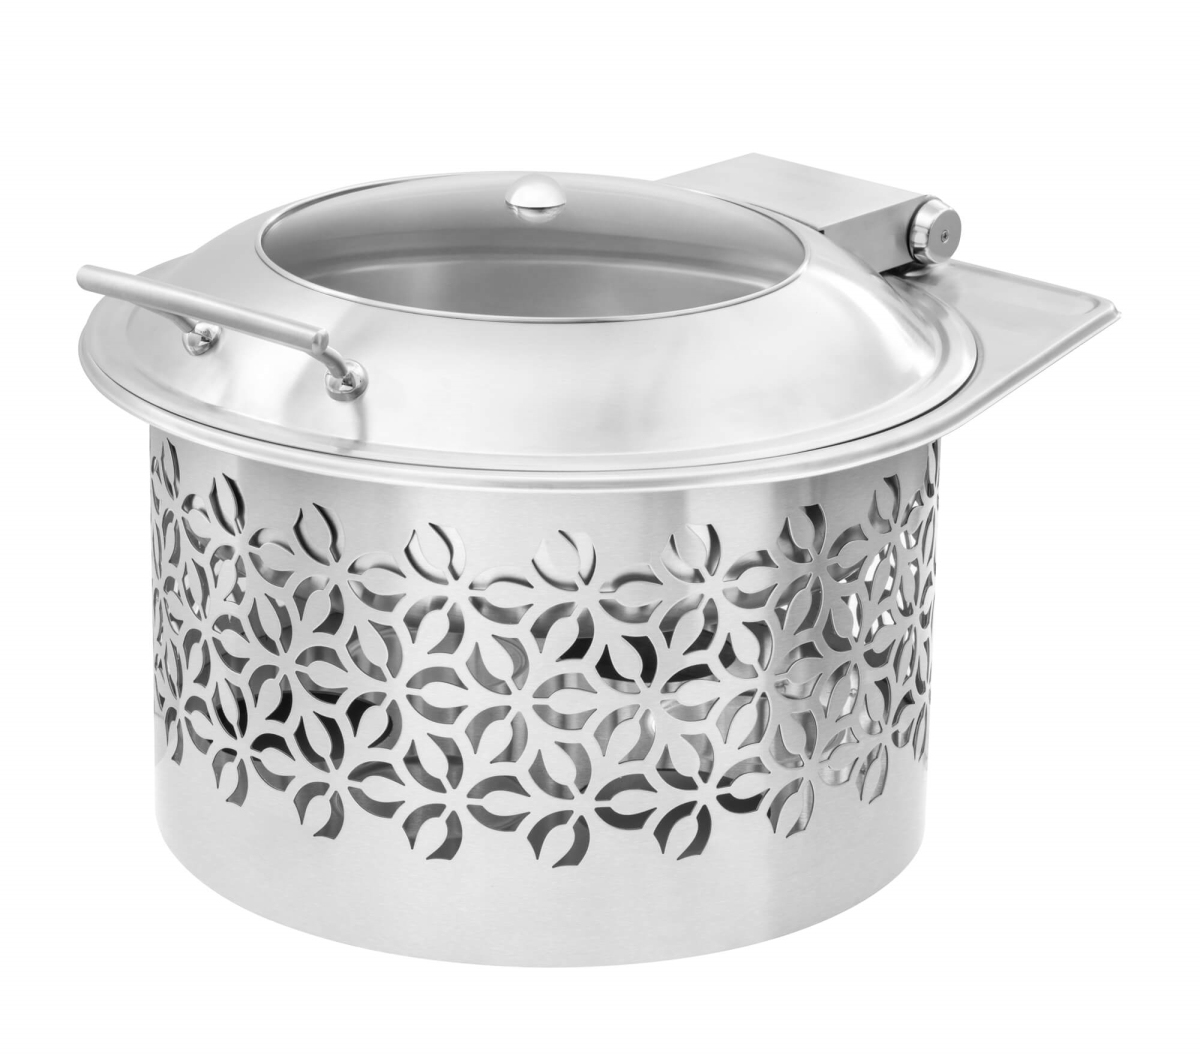 Rosseto Sm288 Round Iris Stainless Steel Warmer With Soft Closing Lid - 2 Piece